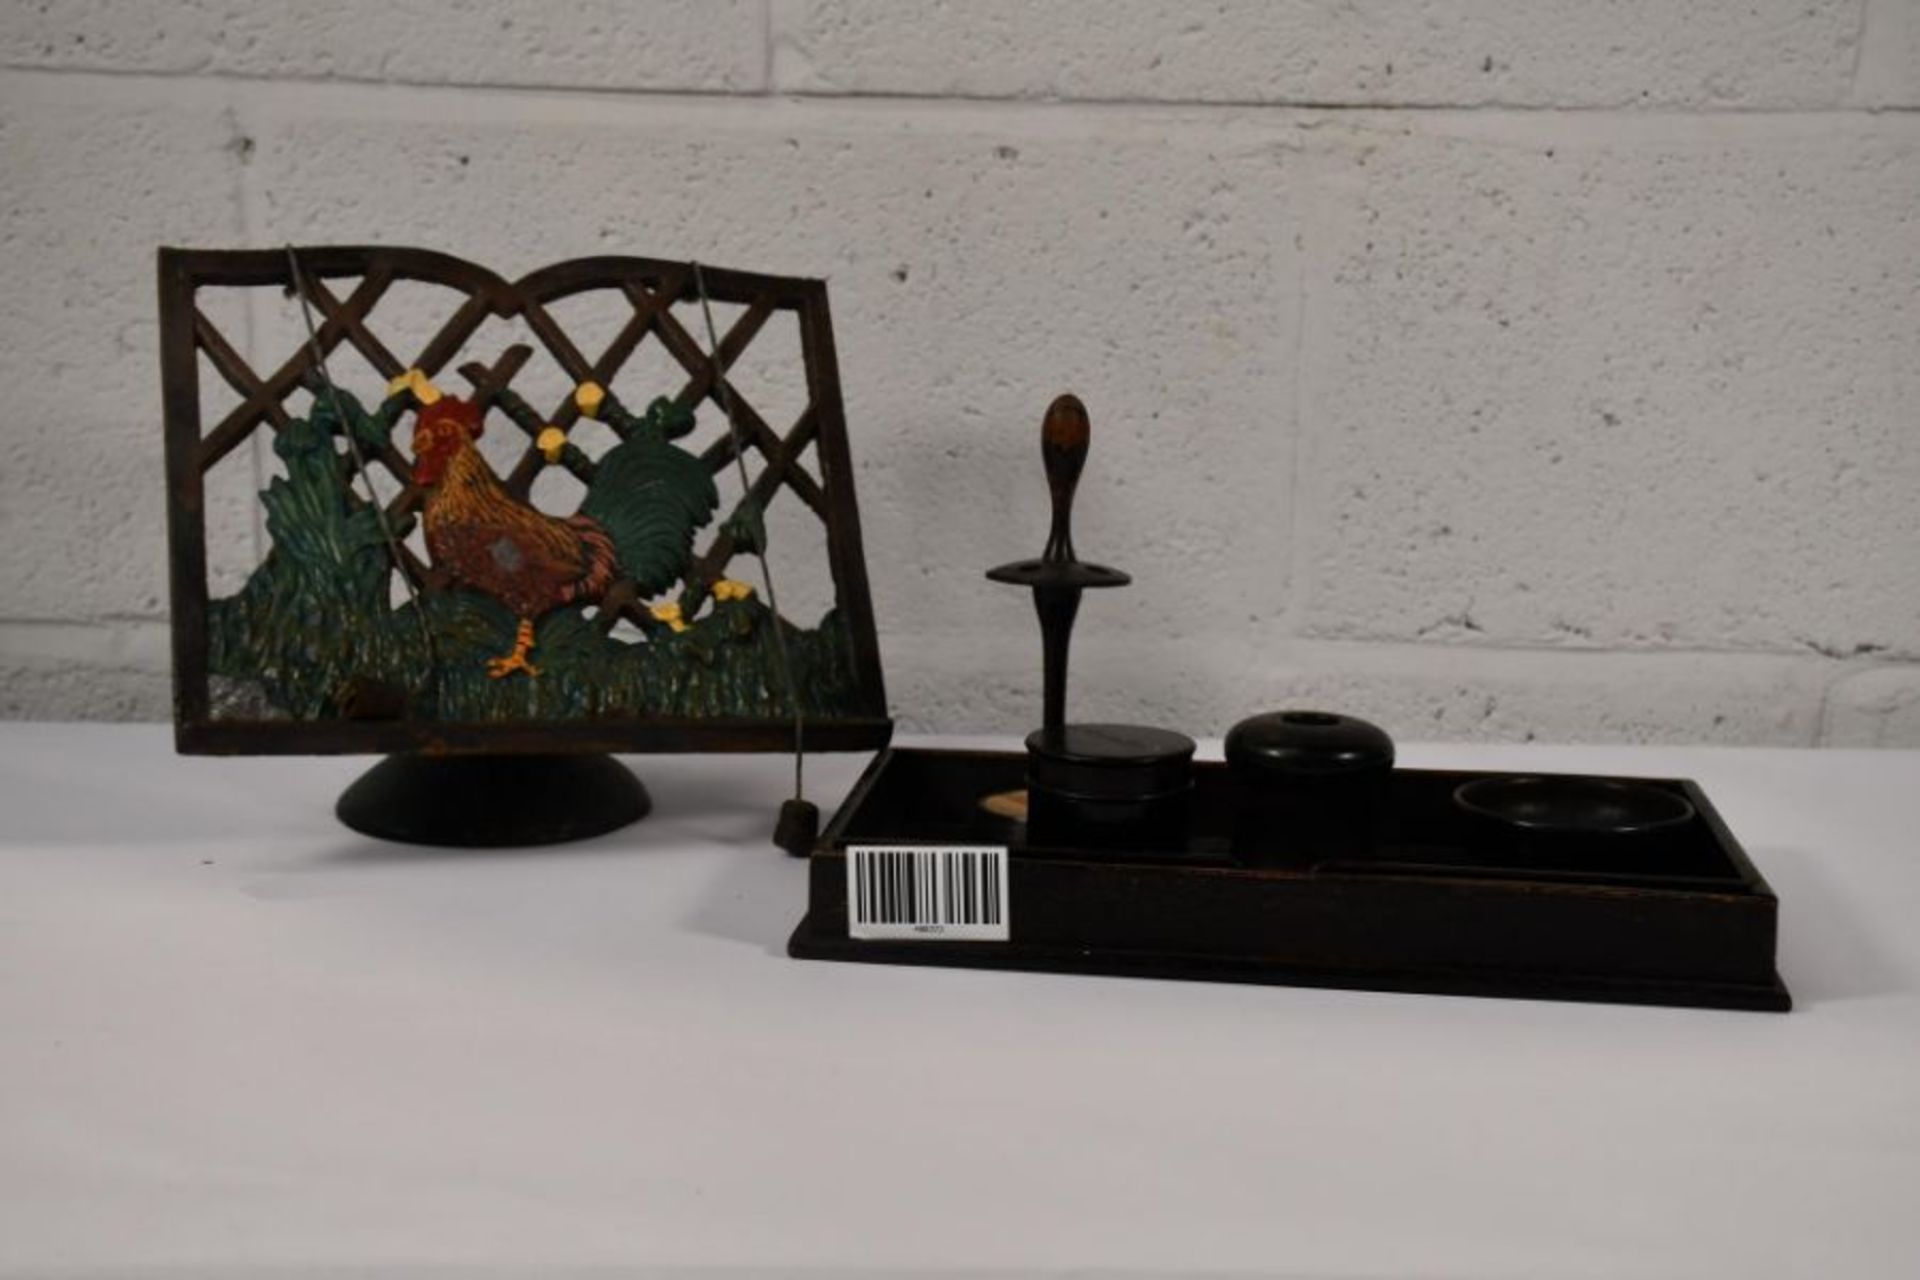 An Ebony dress table set and a cast iron cookery book stand with rooster design.